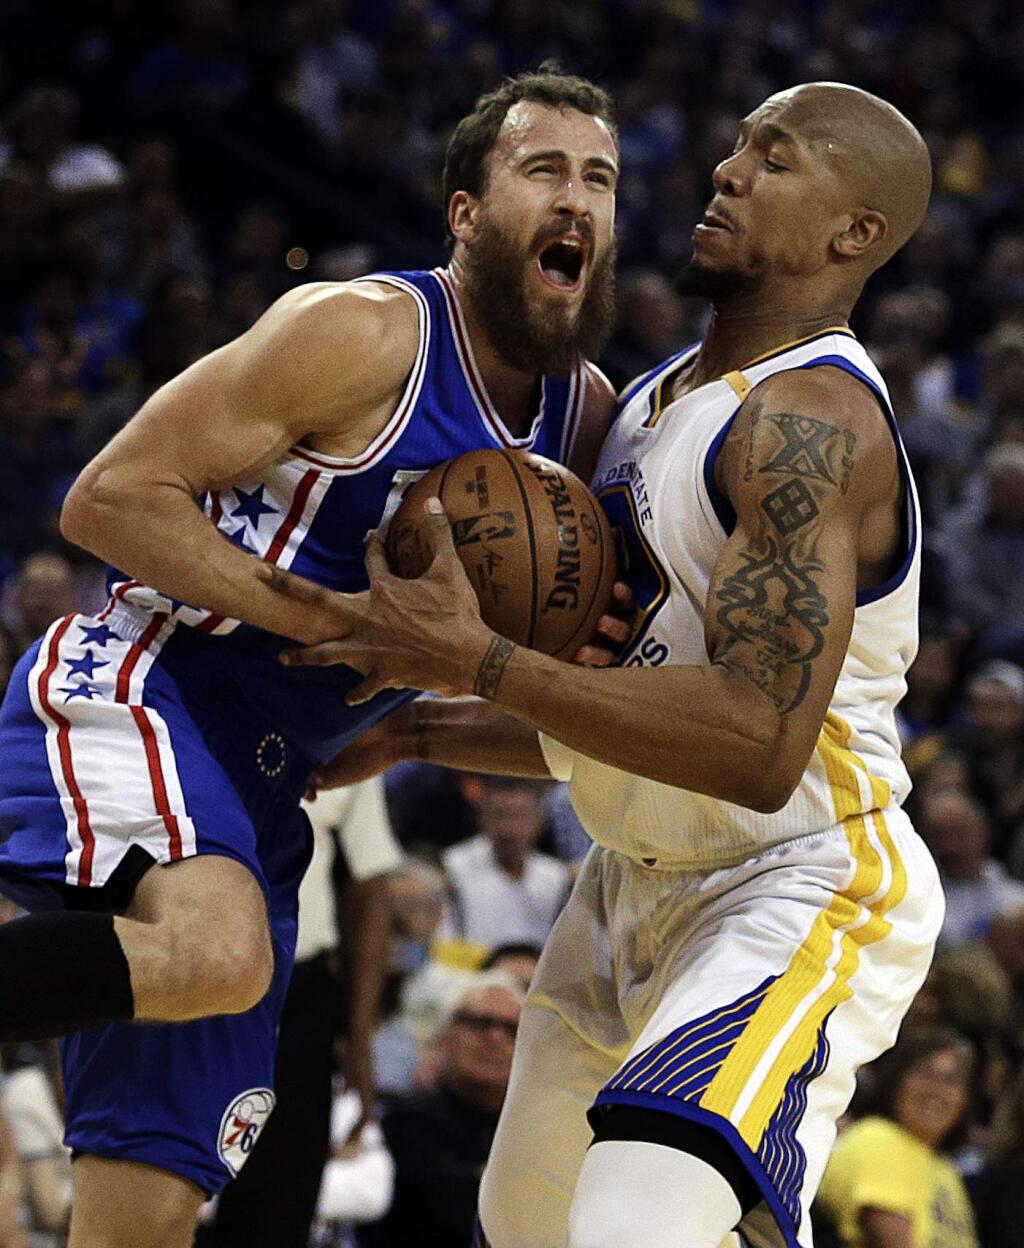 Philadelphia 76ers' Sergio Rodriguez, left, and Golden State Warriors' David West fight for the ball during the first half of an NBA basketball game Tuesday, March 14, 2017, in Oakland, Calif. (AP Photo/Ben Margot)